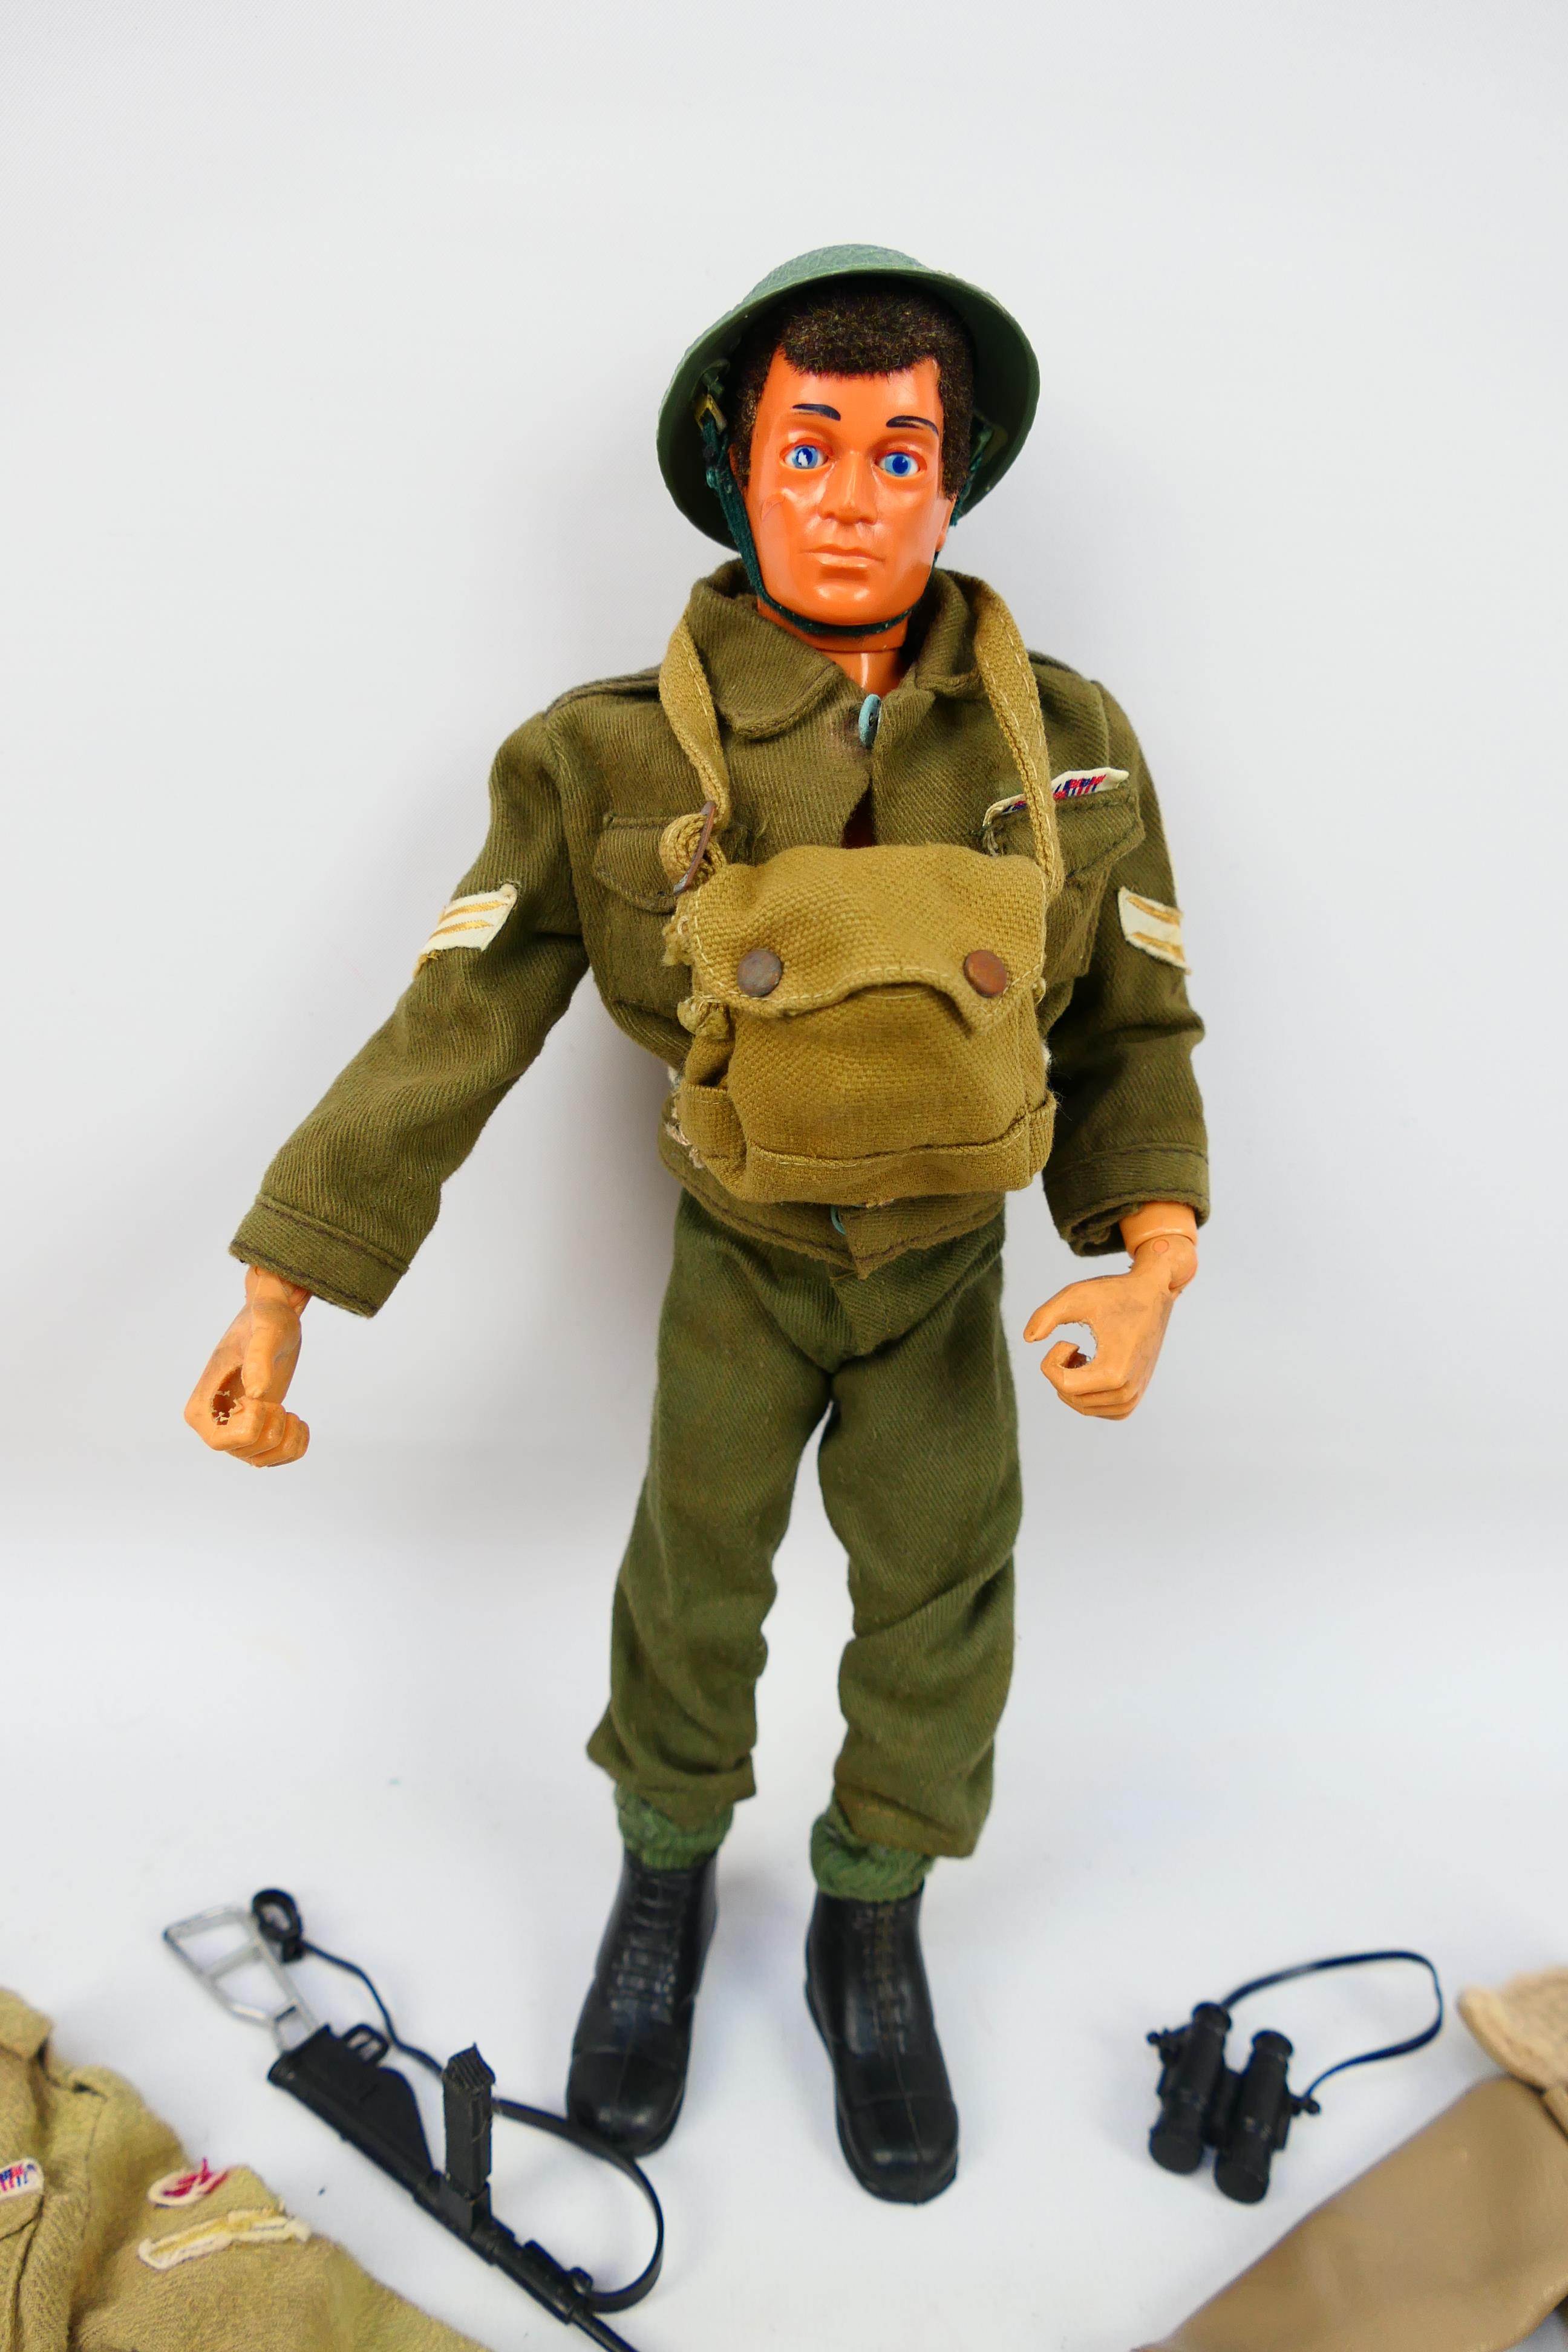 Palitoy - Action Man - A 1978 Action Man action figure with Flock hair and eagle eyes in a British - Image 3 of 16